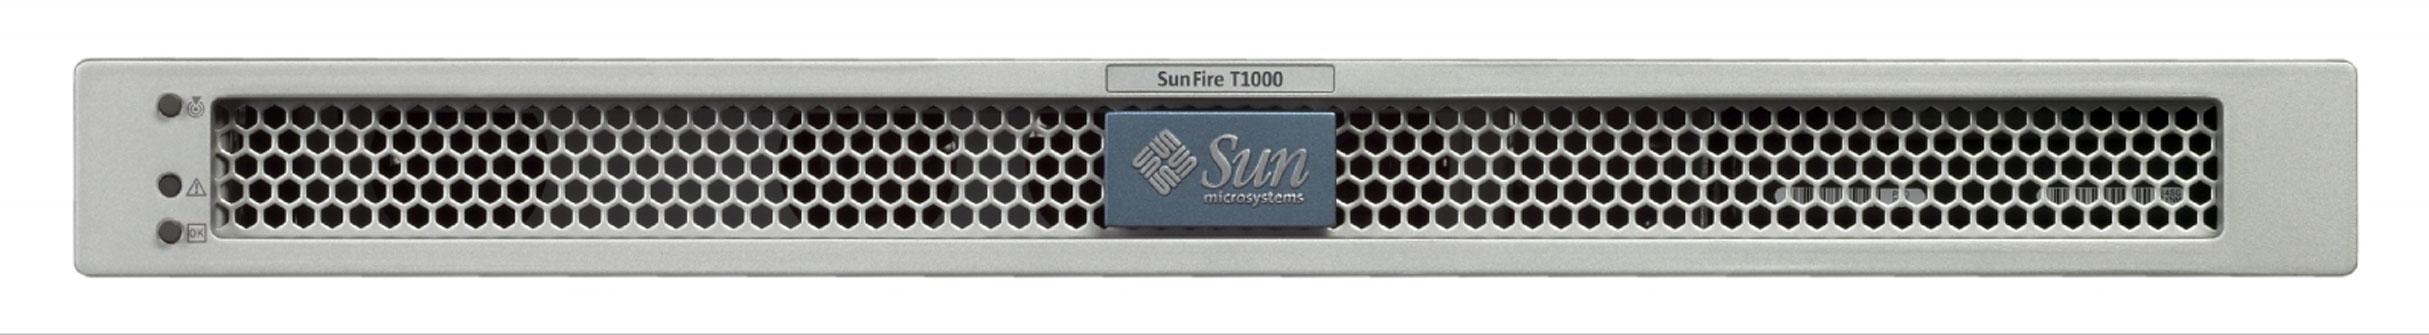 Sun Fire T1000, RoHS:YL Front Zoom